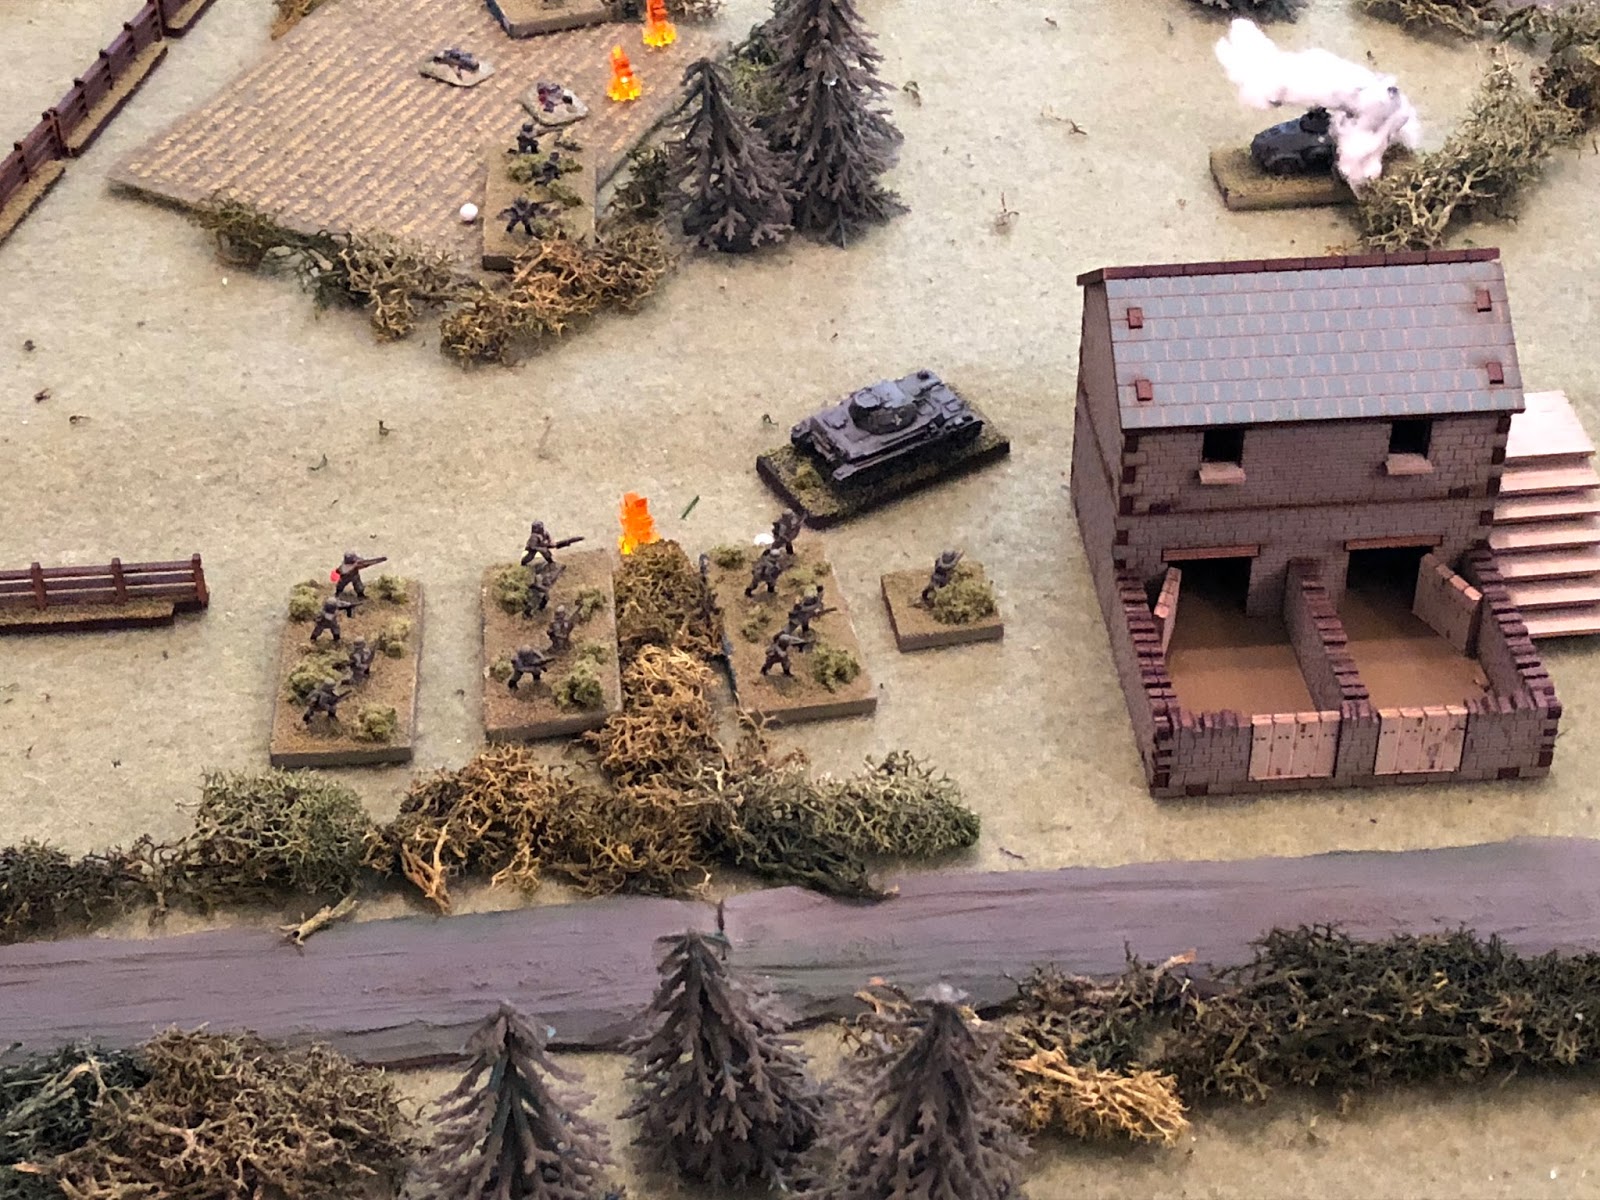  In the center, Cpl Rausch maneuvers his Pz IV to the south side of the Granary, between 4th Platoon (top left) and 3rd Platoon (centre).   